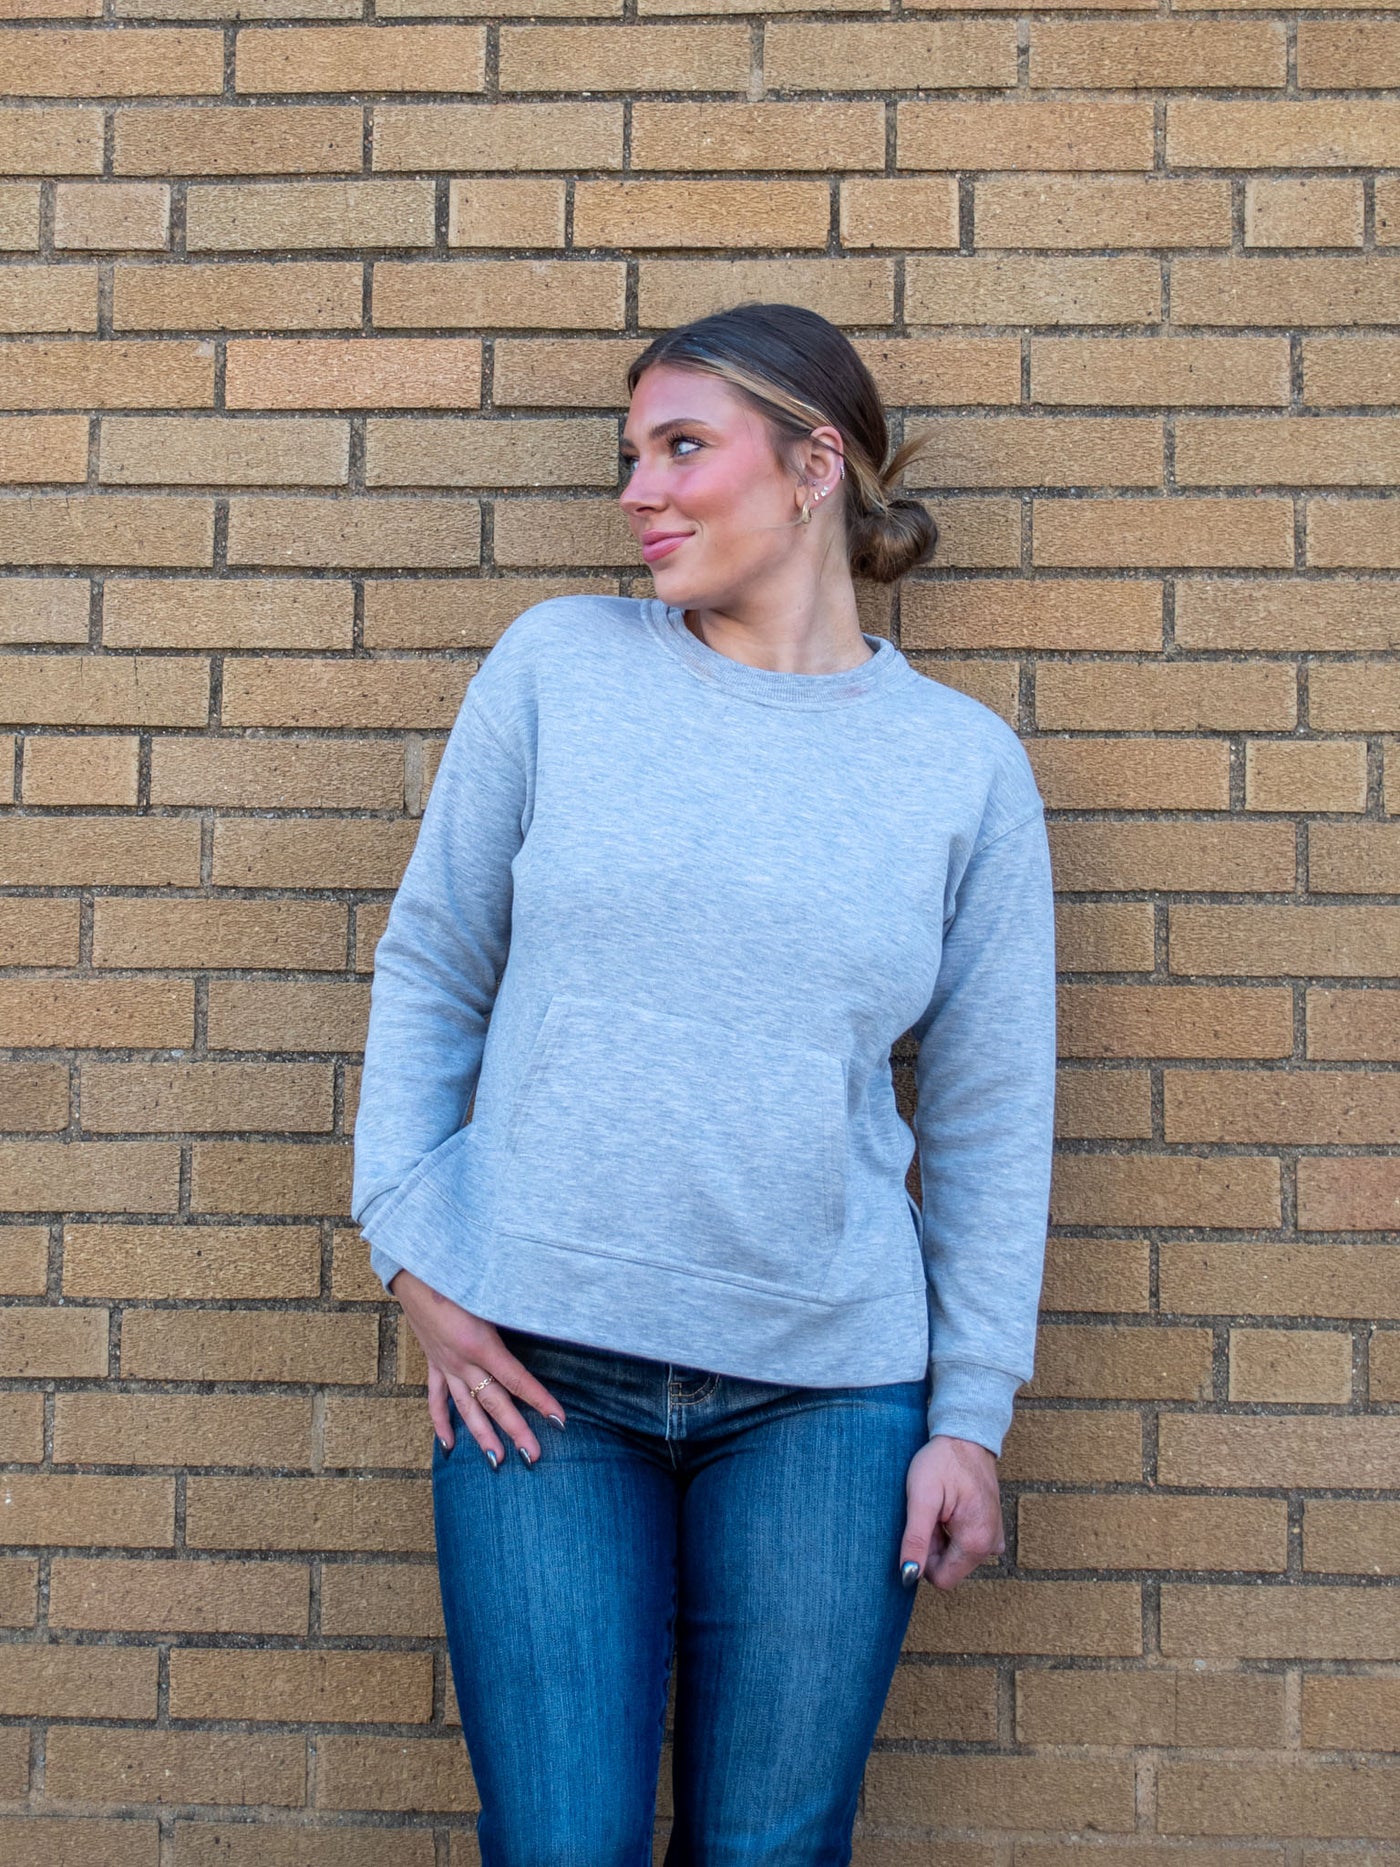 A model wearing a light gray crewneck sweatshirt with a front pocket and side slits. The model has it paired with a dark wash jean.